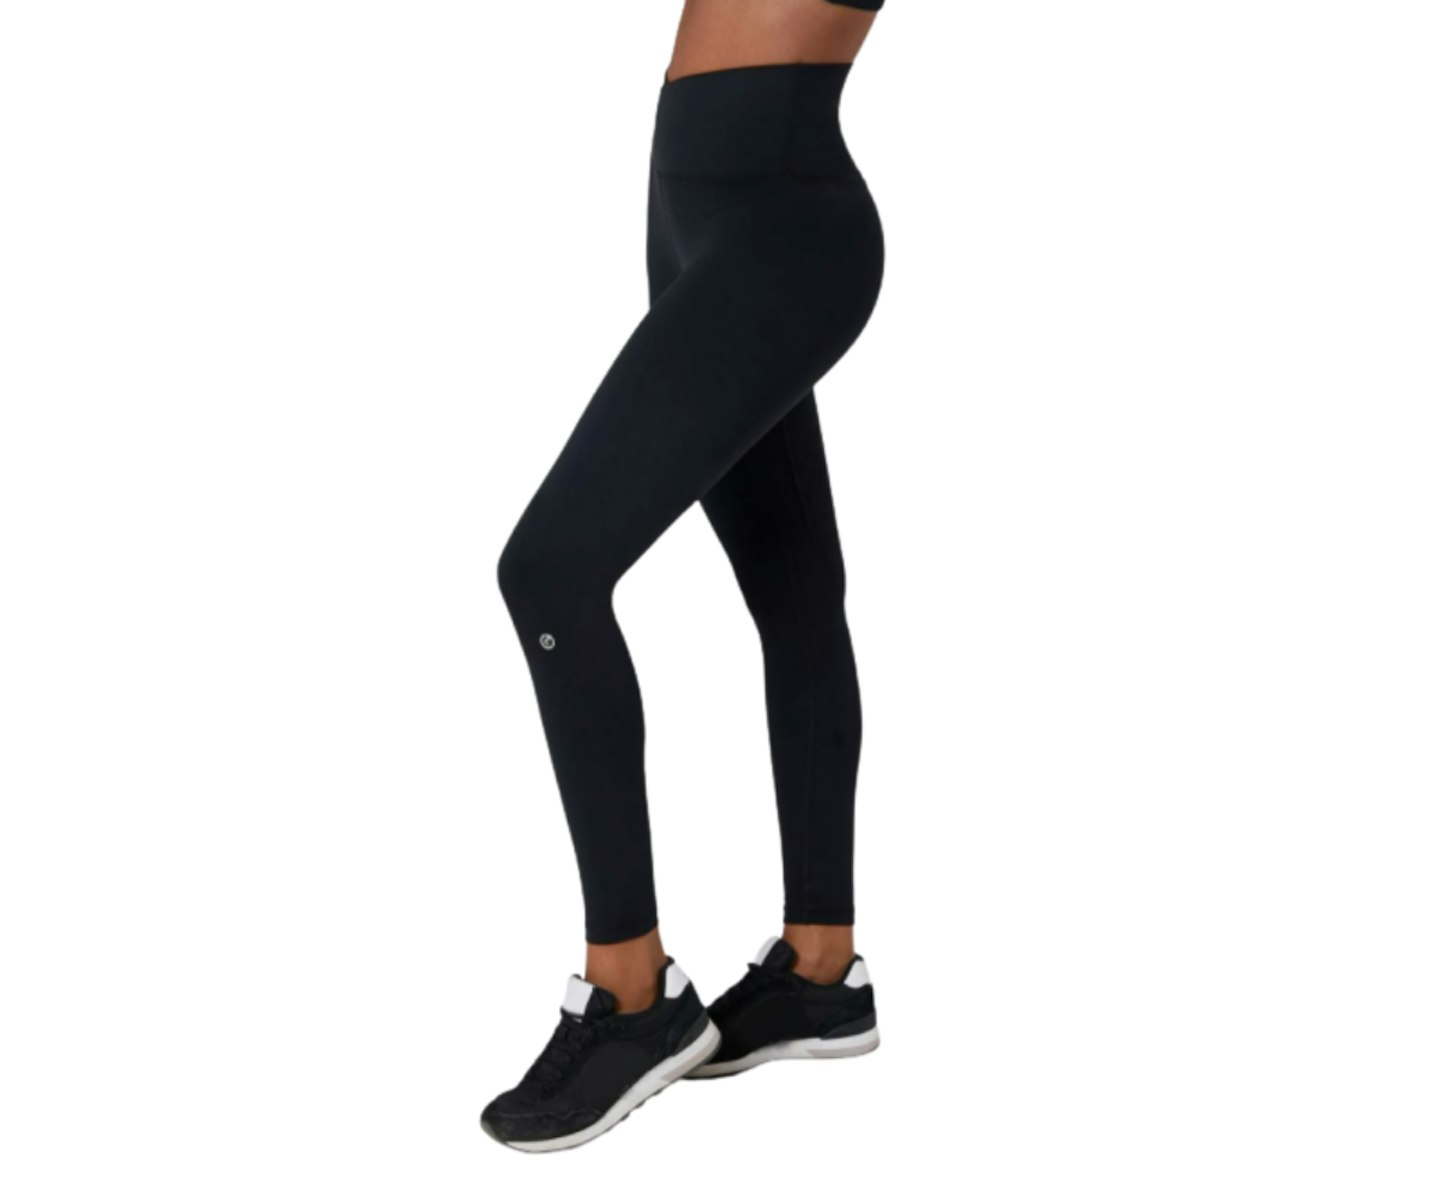 I've Found A Dupe For Lululemon Aligns And They're Just £18.99